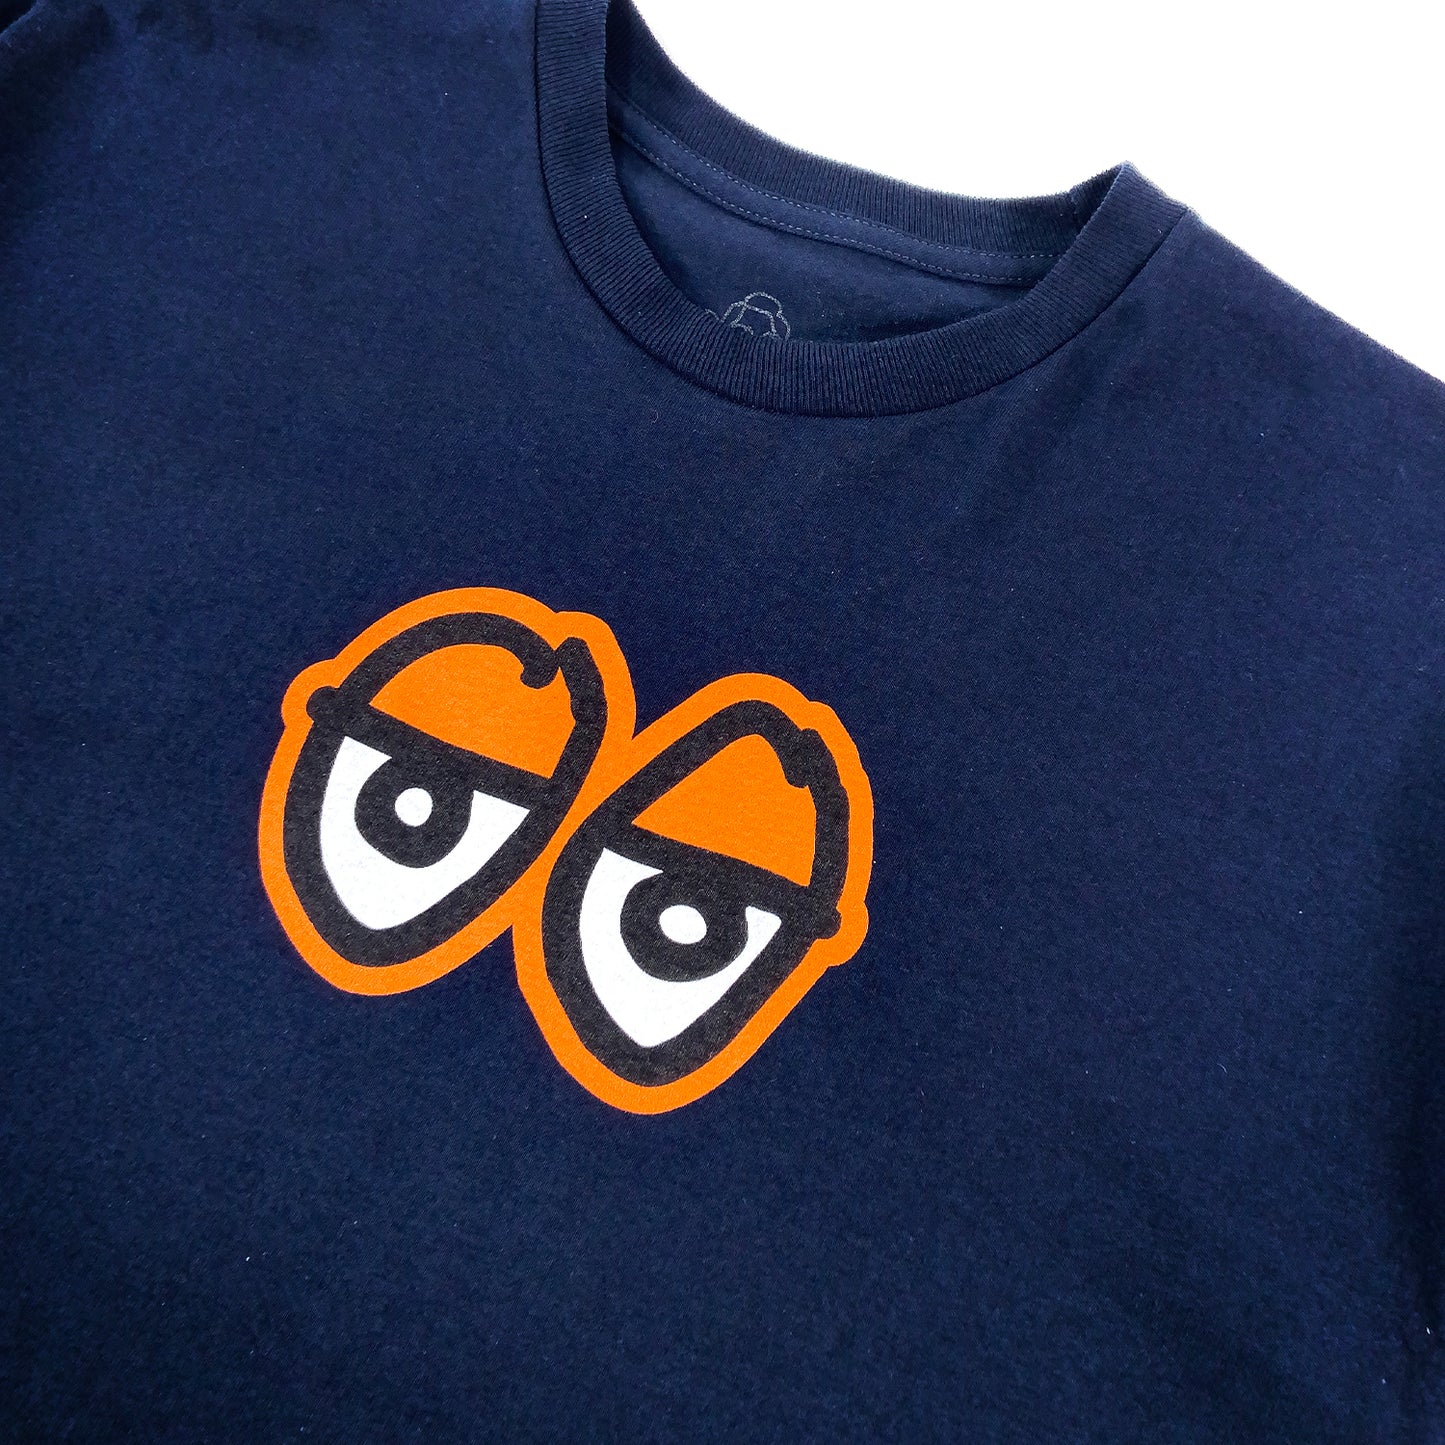 Krooked - Eyes - T-shirt - Navy - Prime Delux Store